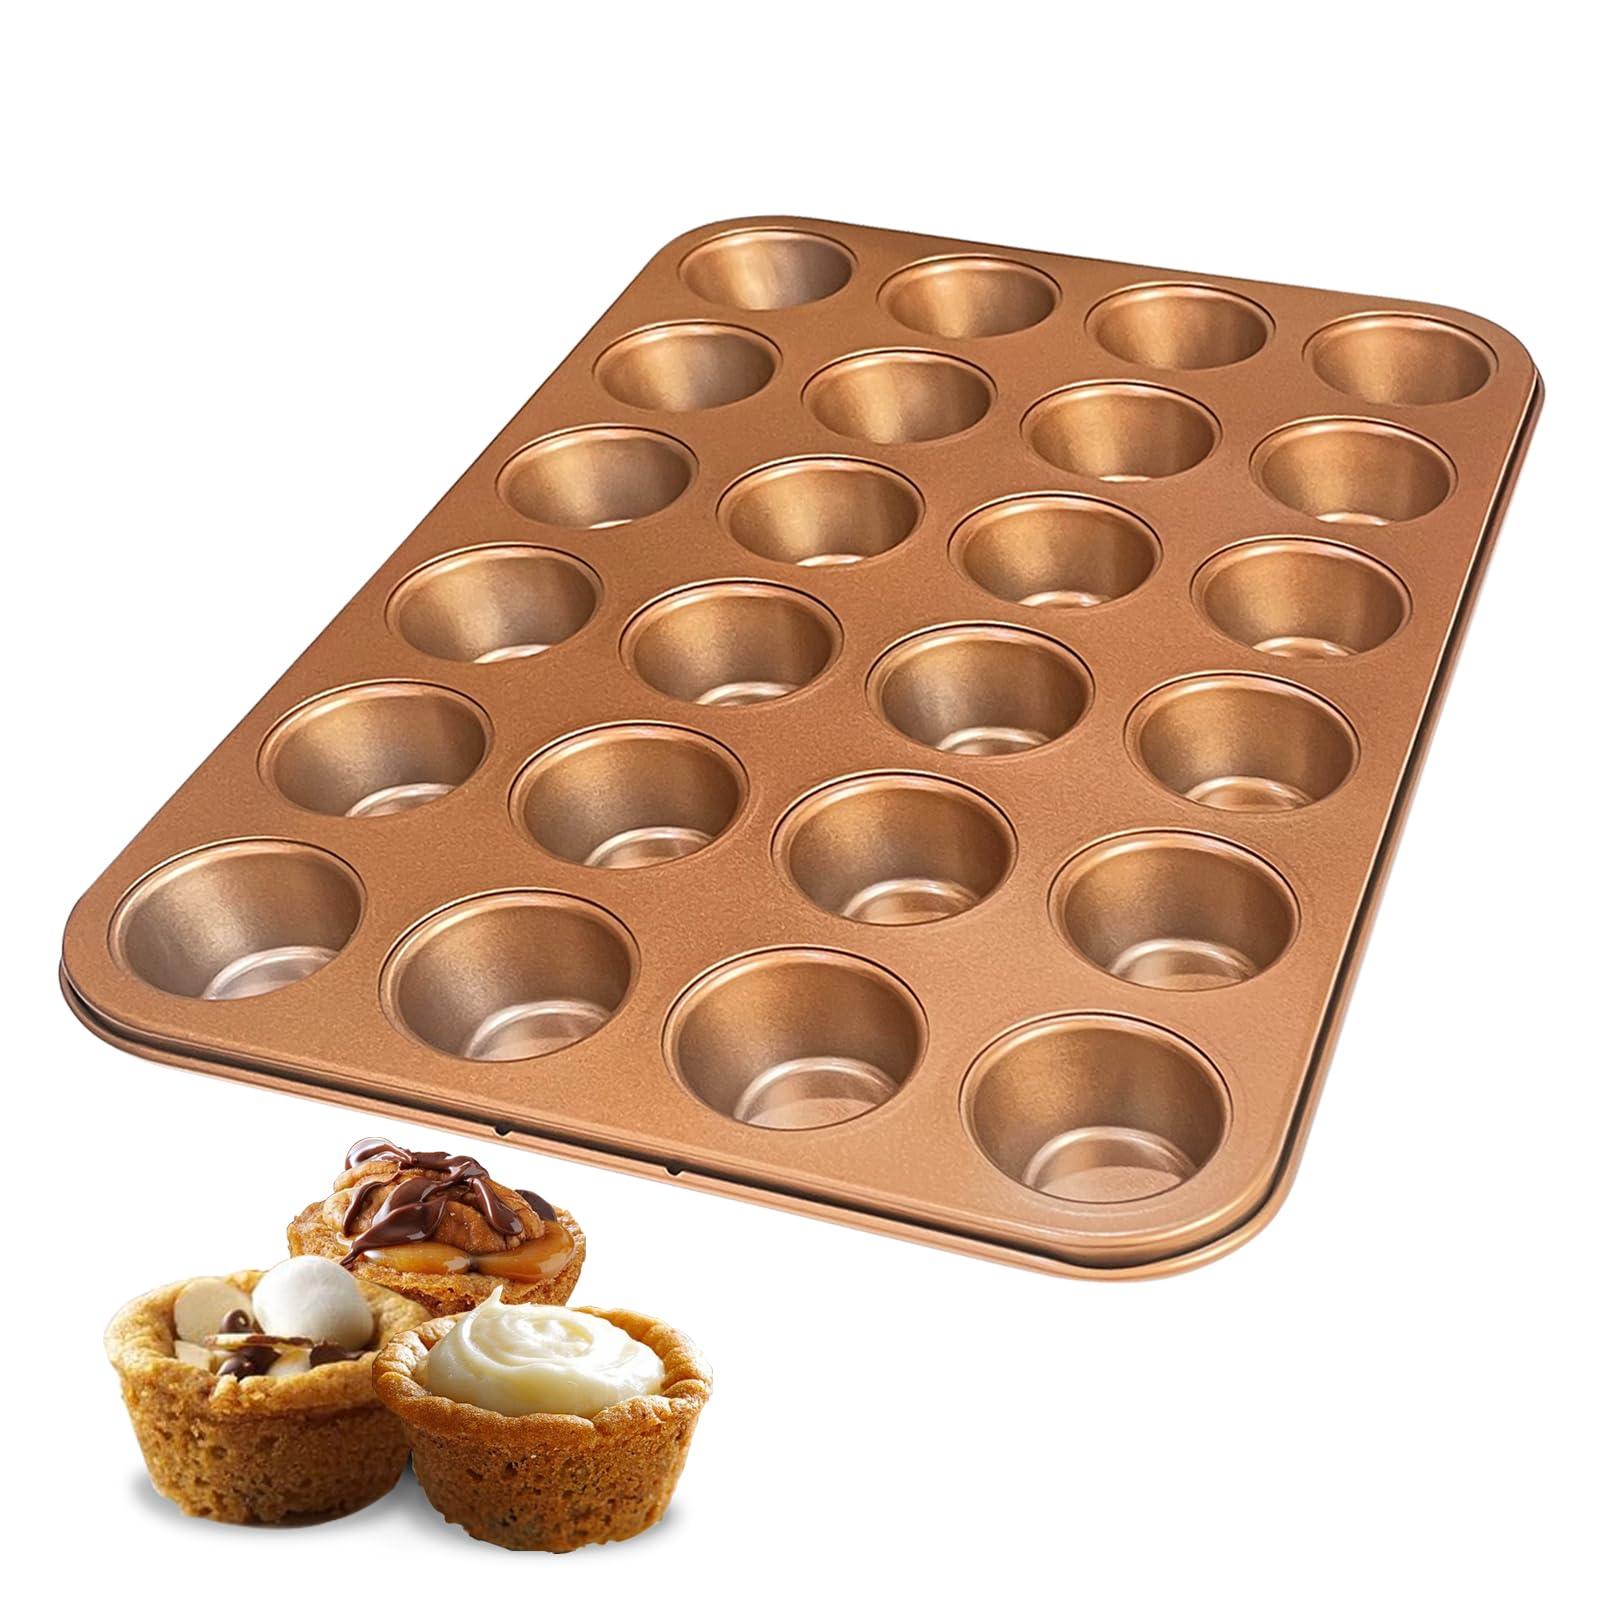 RavisingRidge Muffin Pan Nonstick for Baking, Professional Ultrathick Mini Cupcake pan 24 Cups, Golden Muffin Tin Tray, Premium, Dishwasher Safe, and Heavy Duty - CookCave